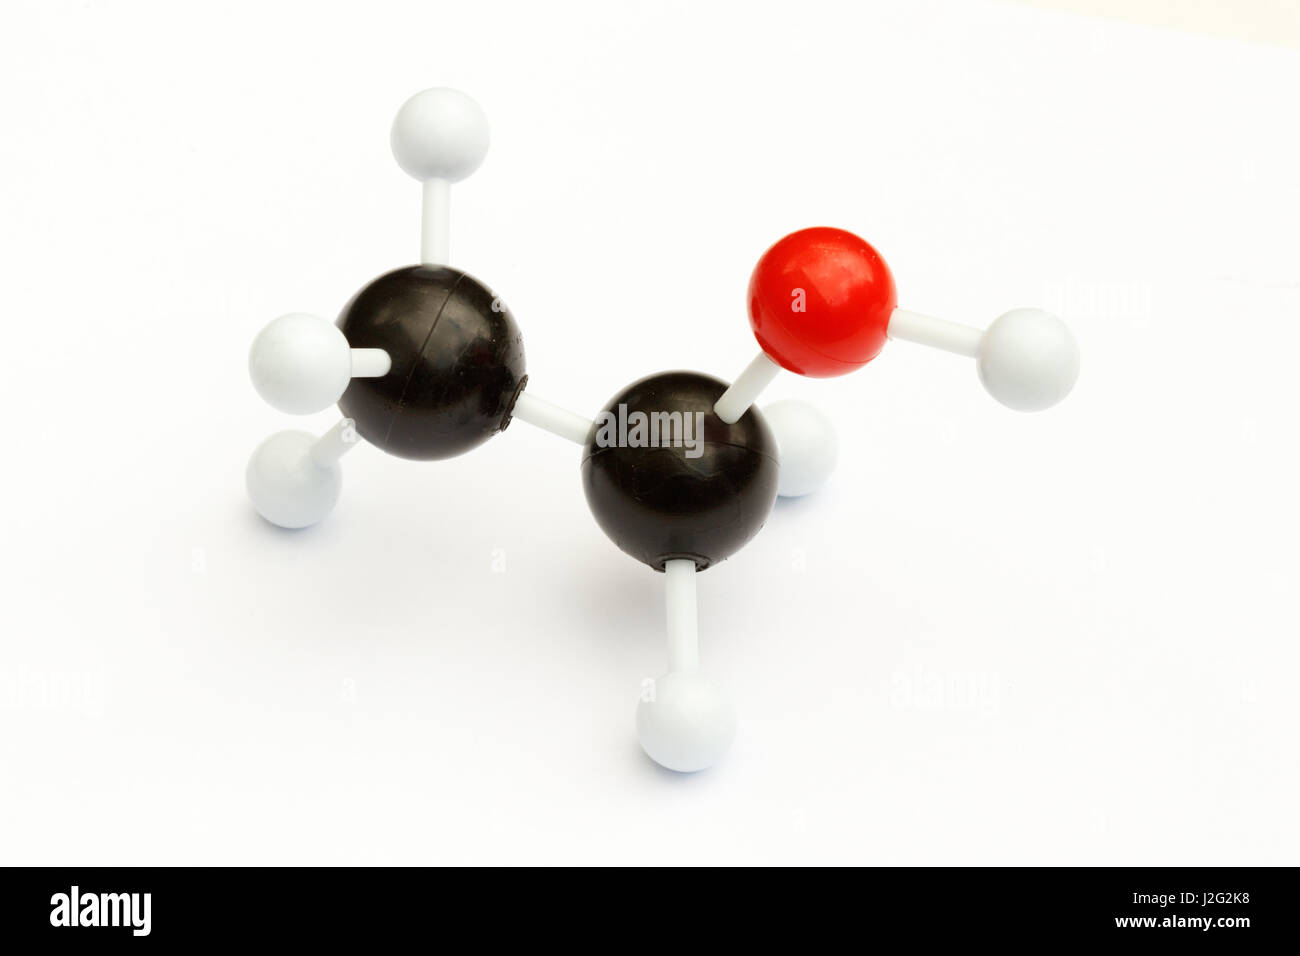 Plastic ball and stick model of an alcohol (ethanol, C2H5OH) molecule on a white background. Stock Photo